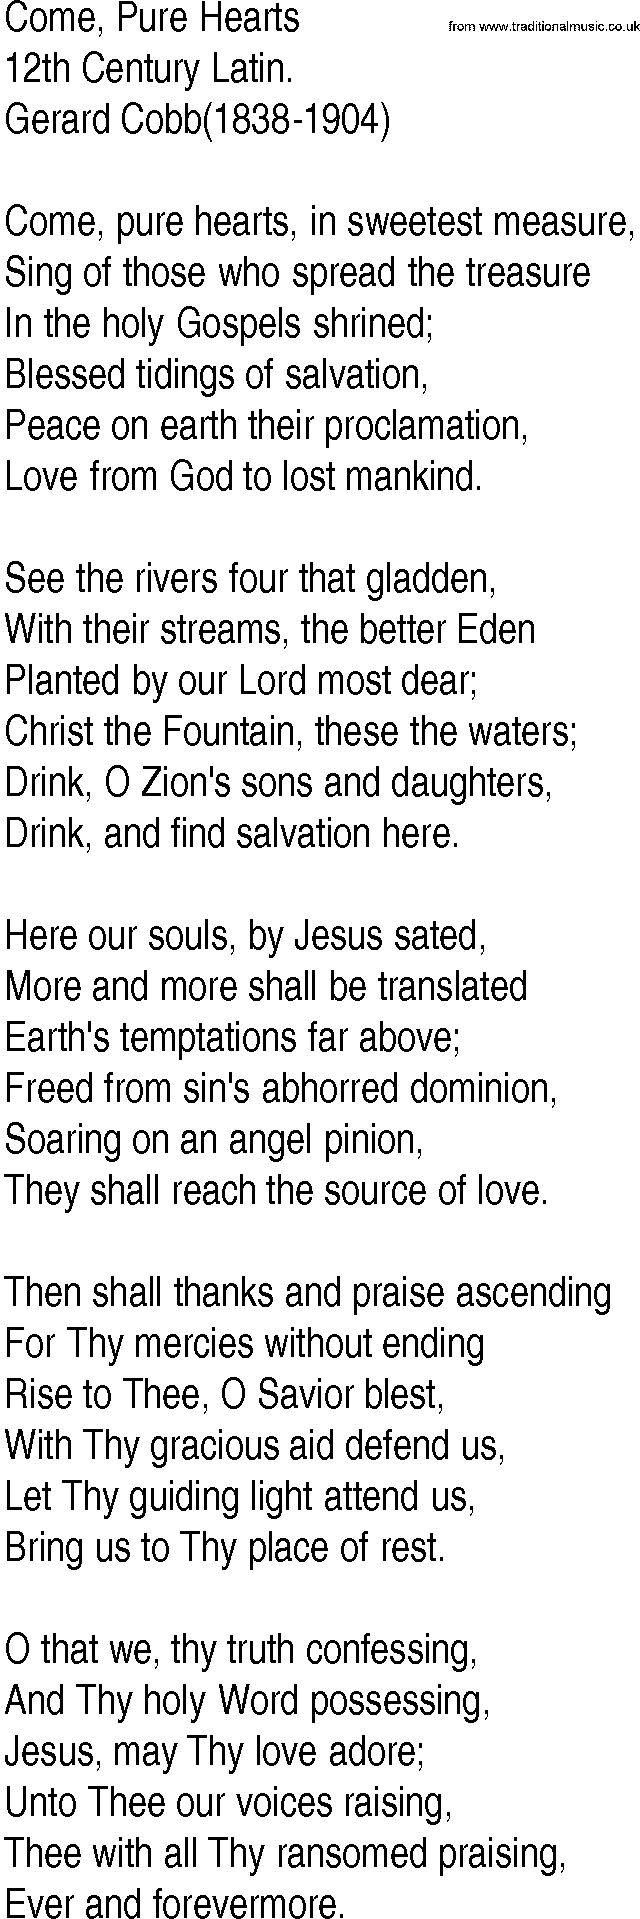 Hymn and Gospel Song: Come, Pure Hearts by th Century Latin lyrics